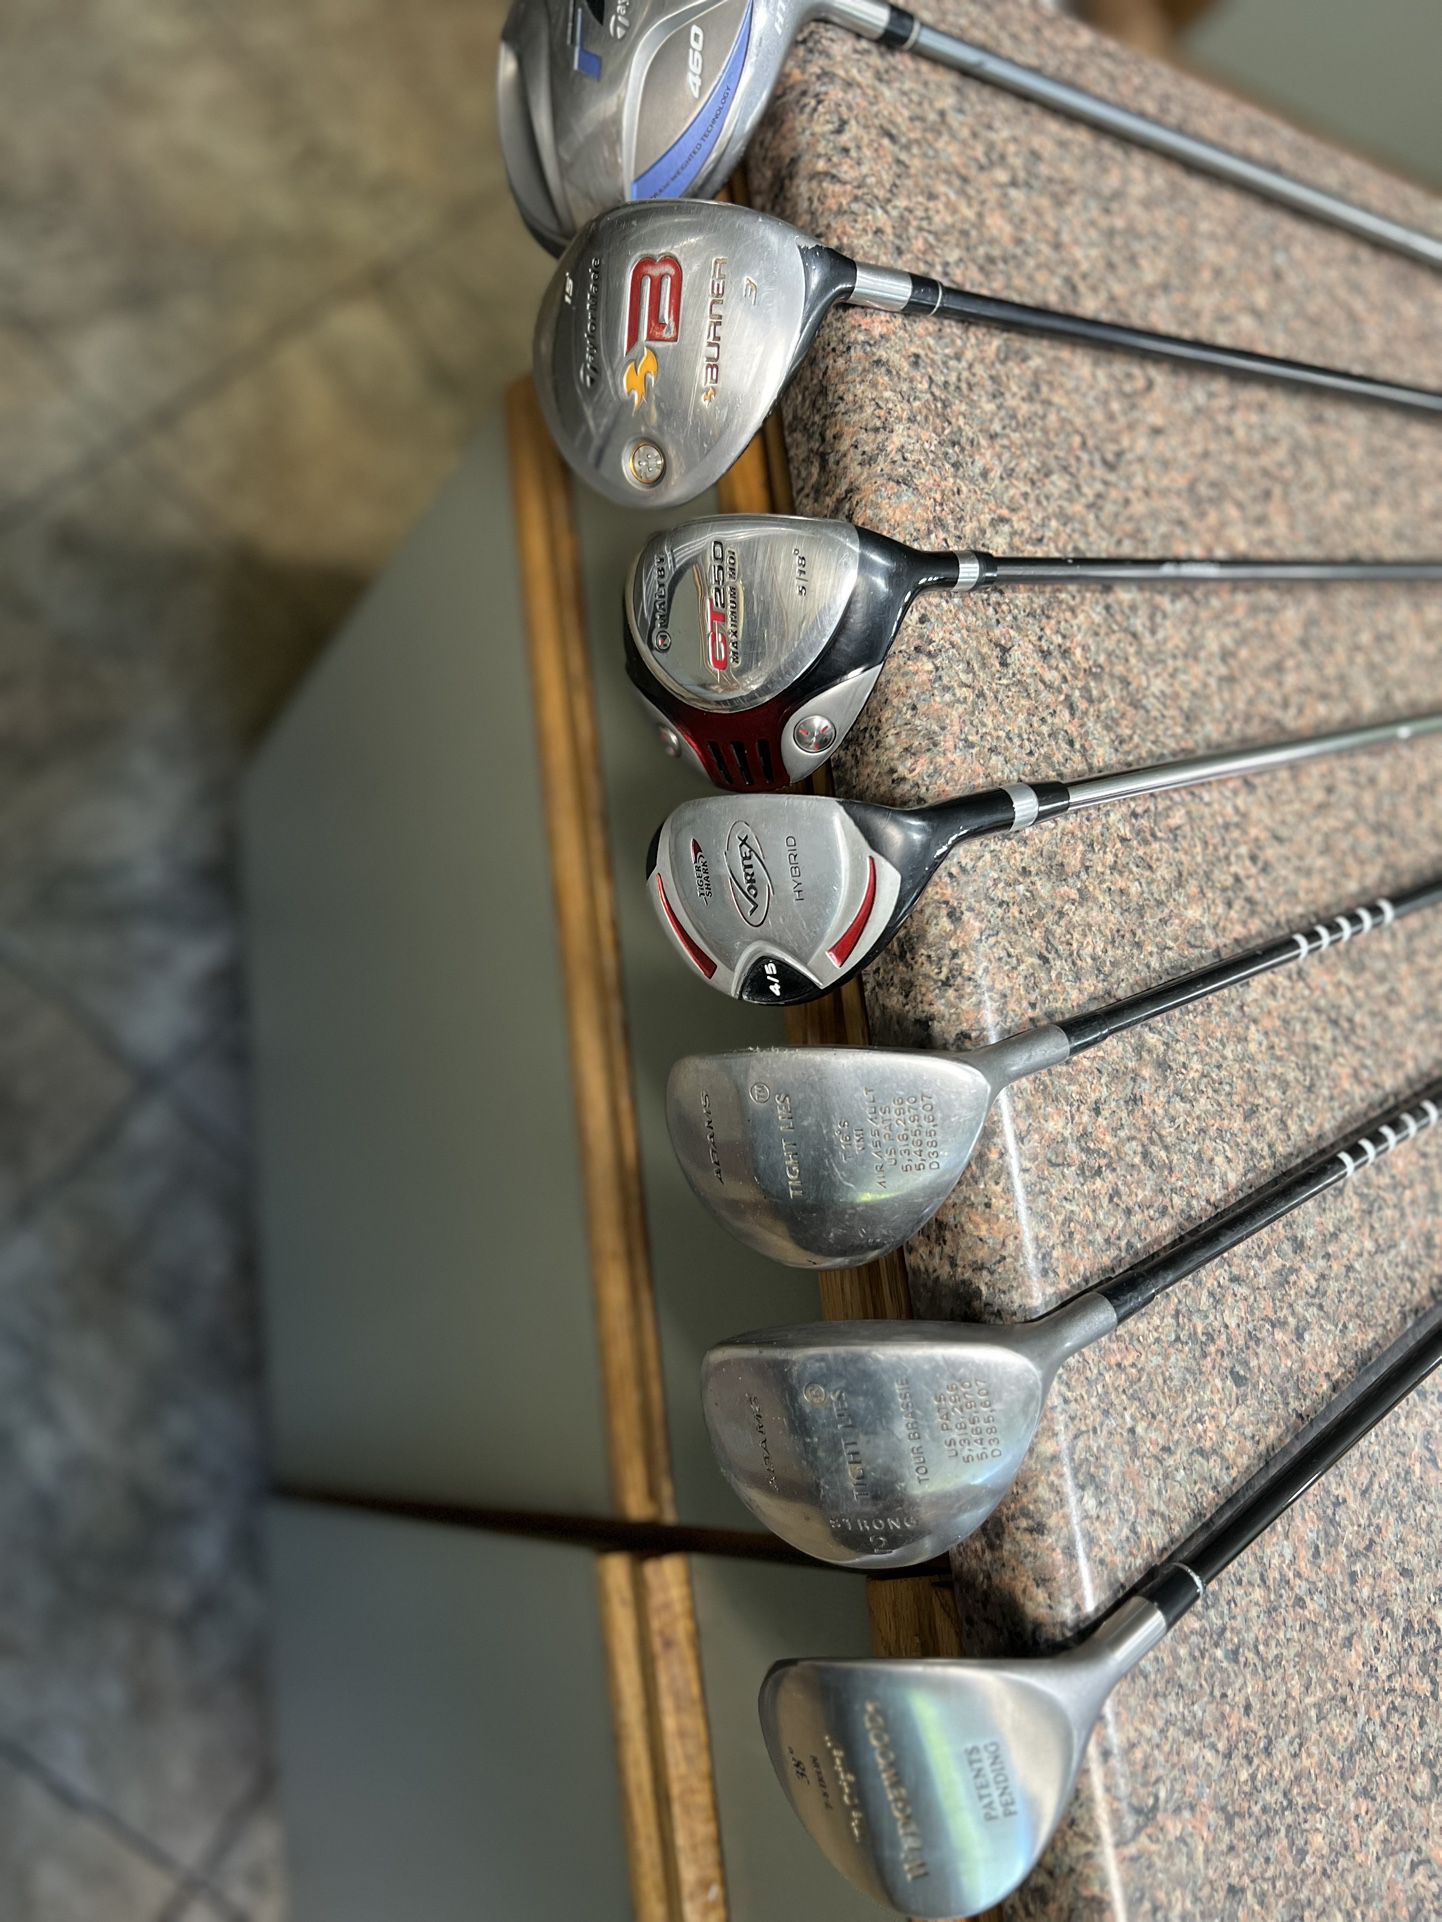 golf, Taylor made Driver / Draw, specialty hybrid clubs take a look at the video, ask for pricing